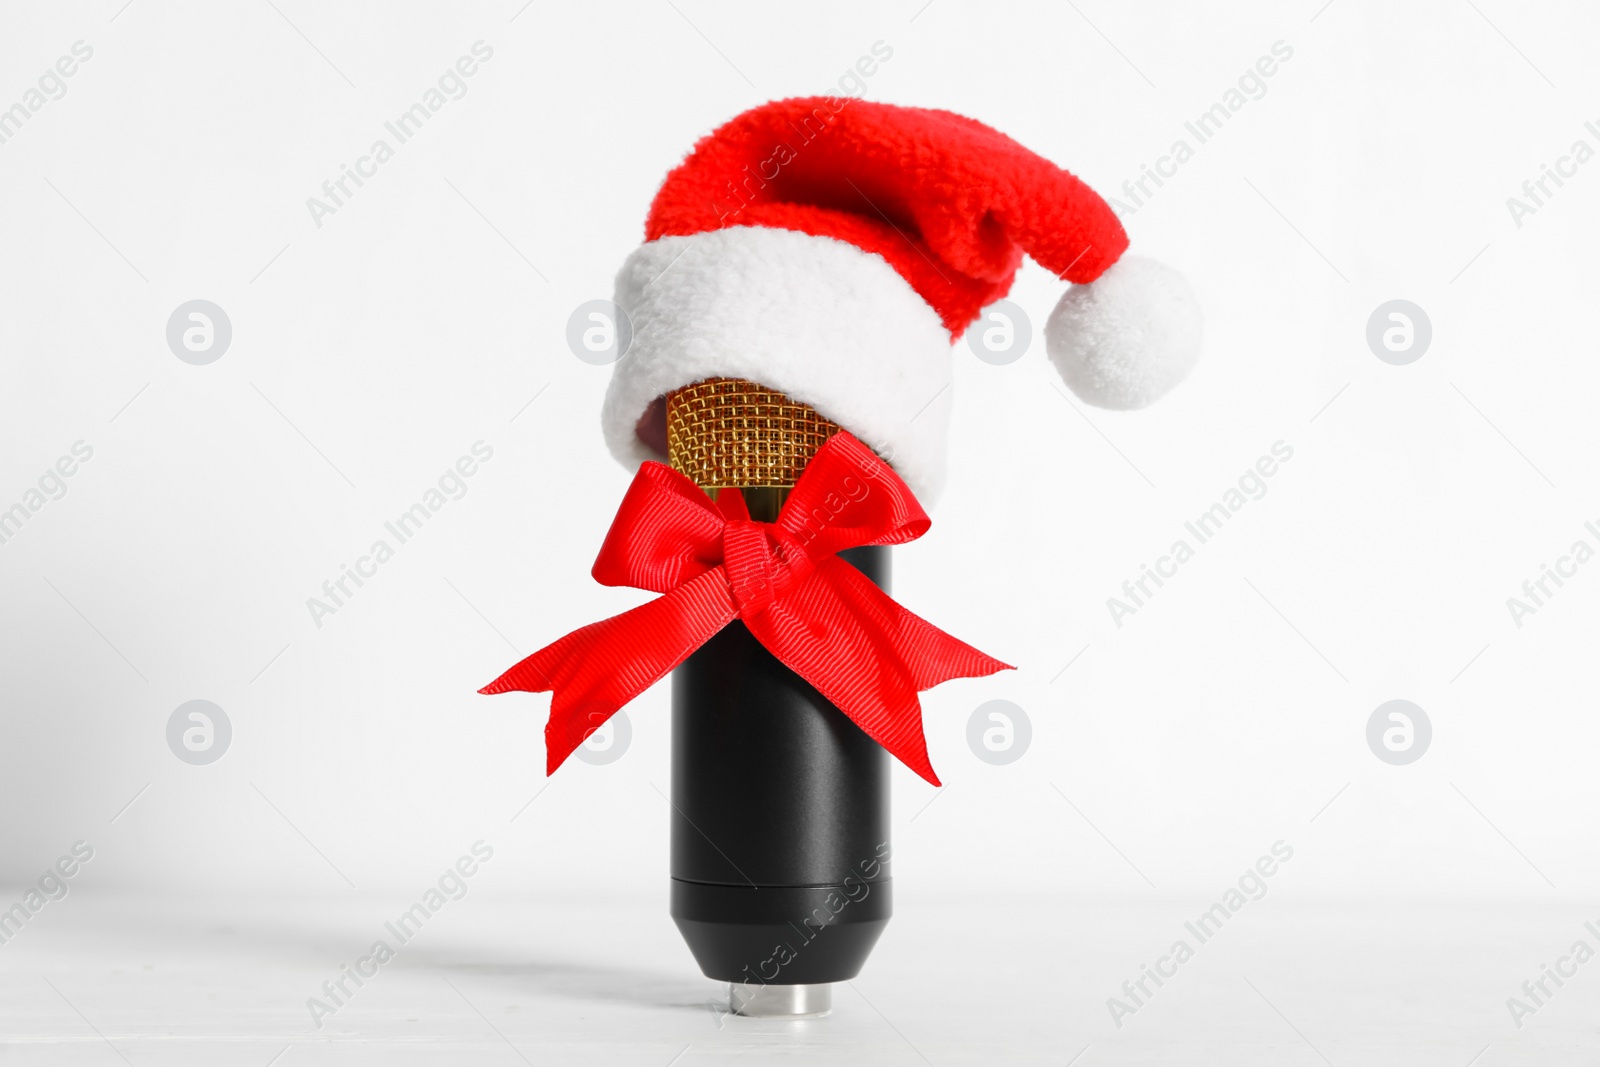 Photo of Microphone with Santa hat and red bow on white background. Christmas music